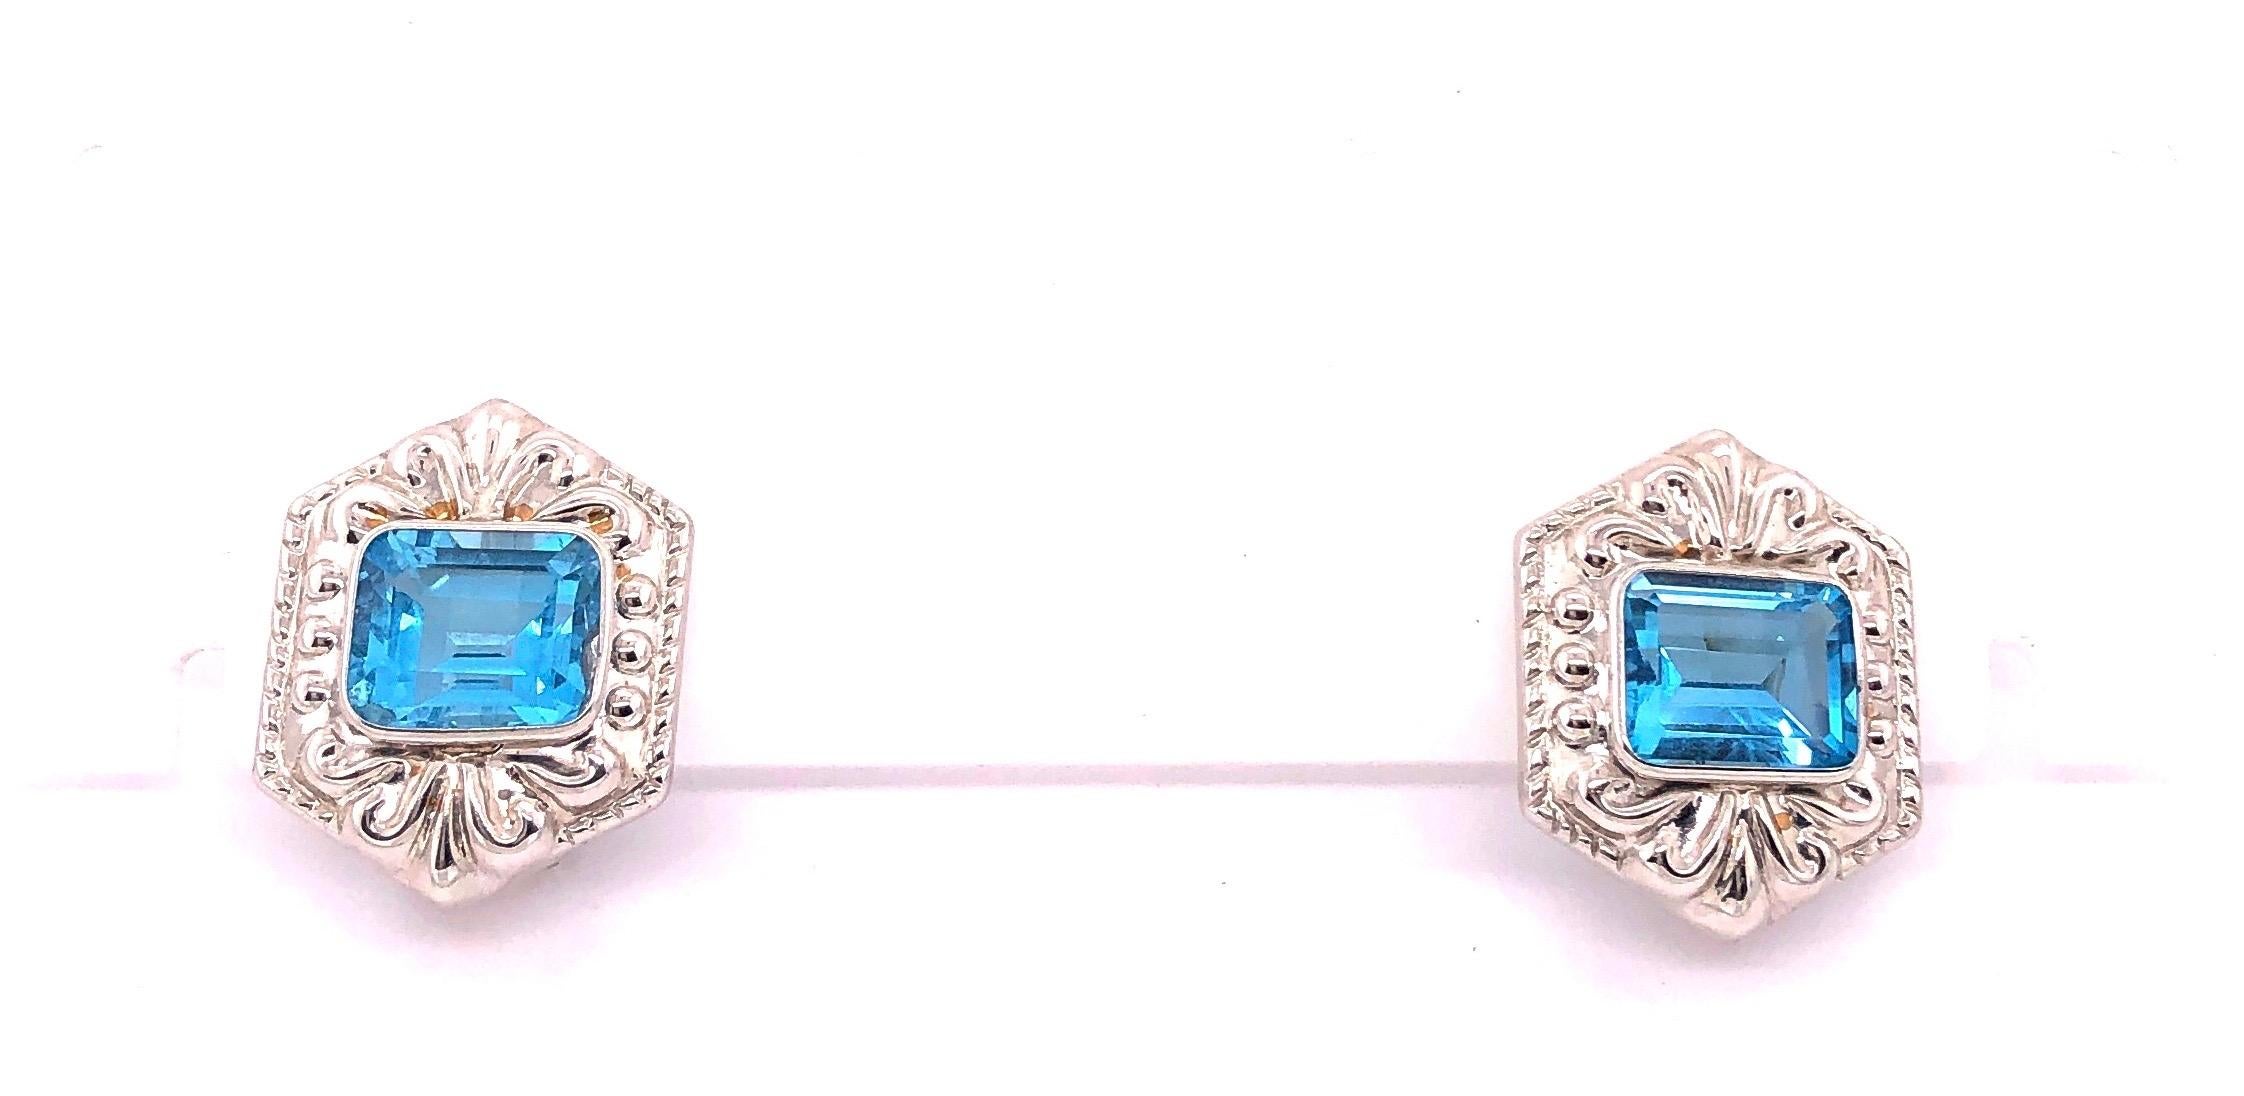 14 Karat White Gold French Back Huggie Earrings with Blue Topaz For Sale 4